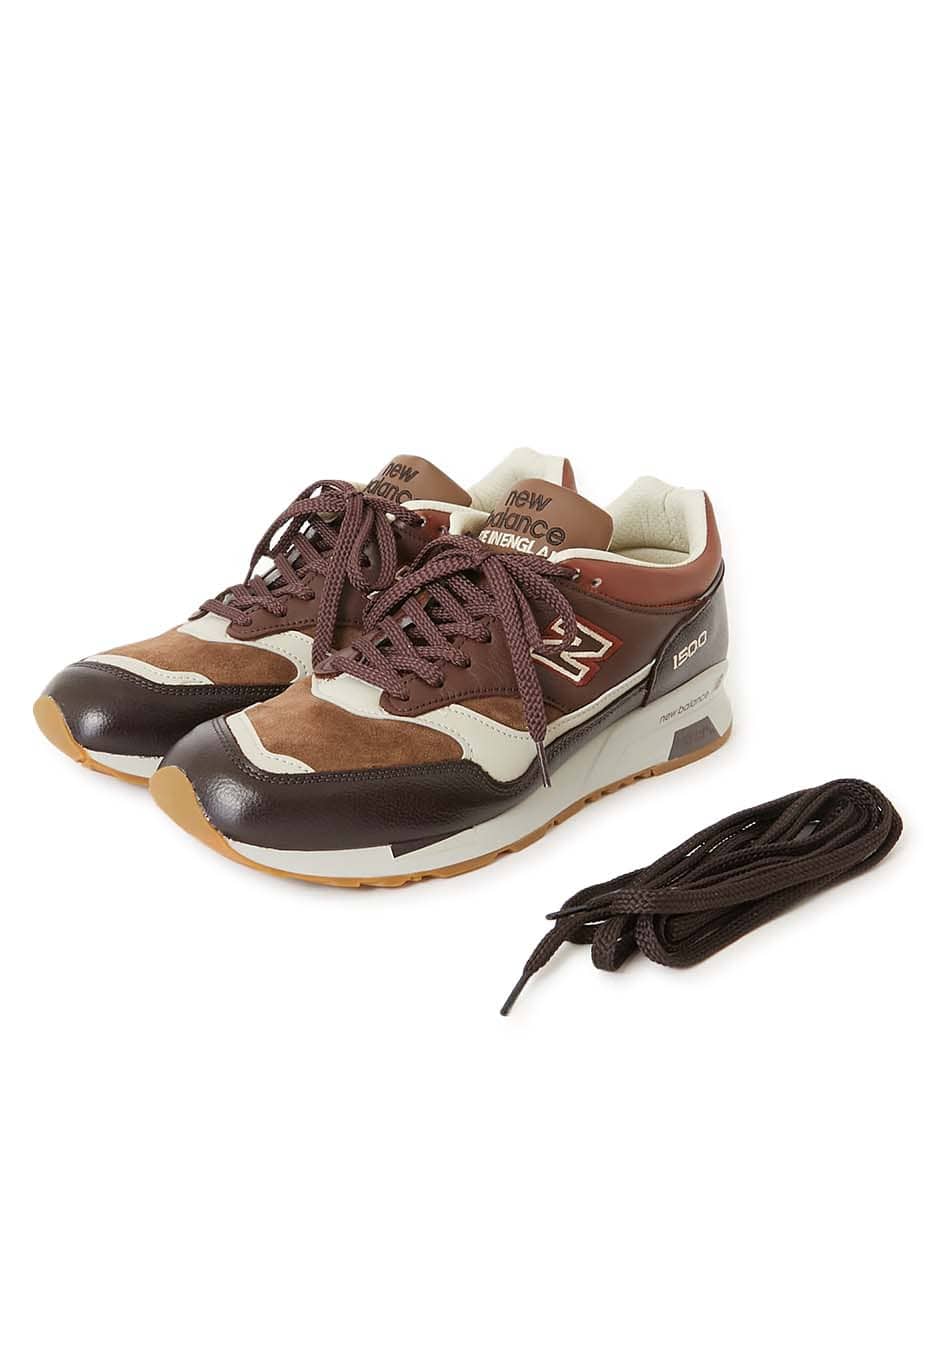 NEW BALANCE M1500 SHOES MADE IN UK